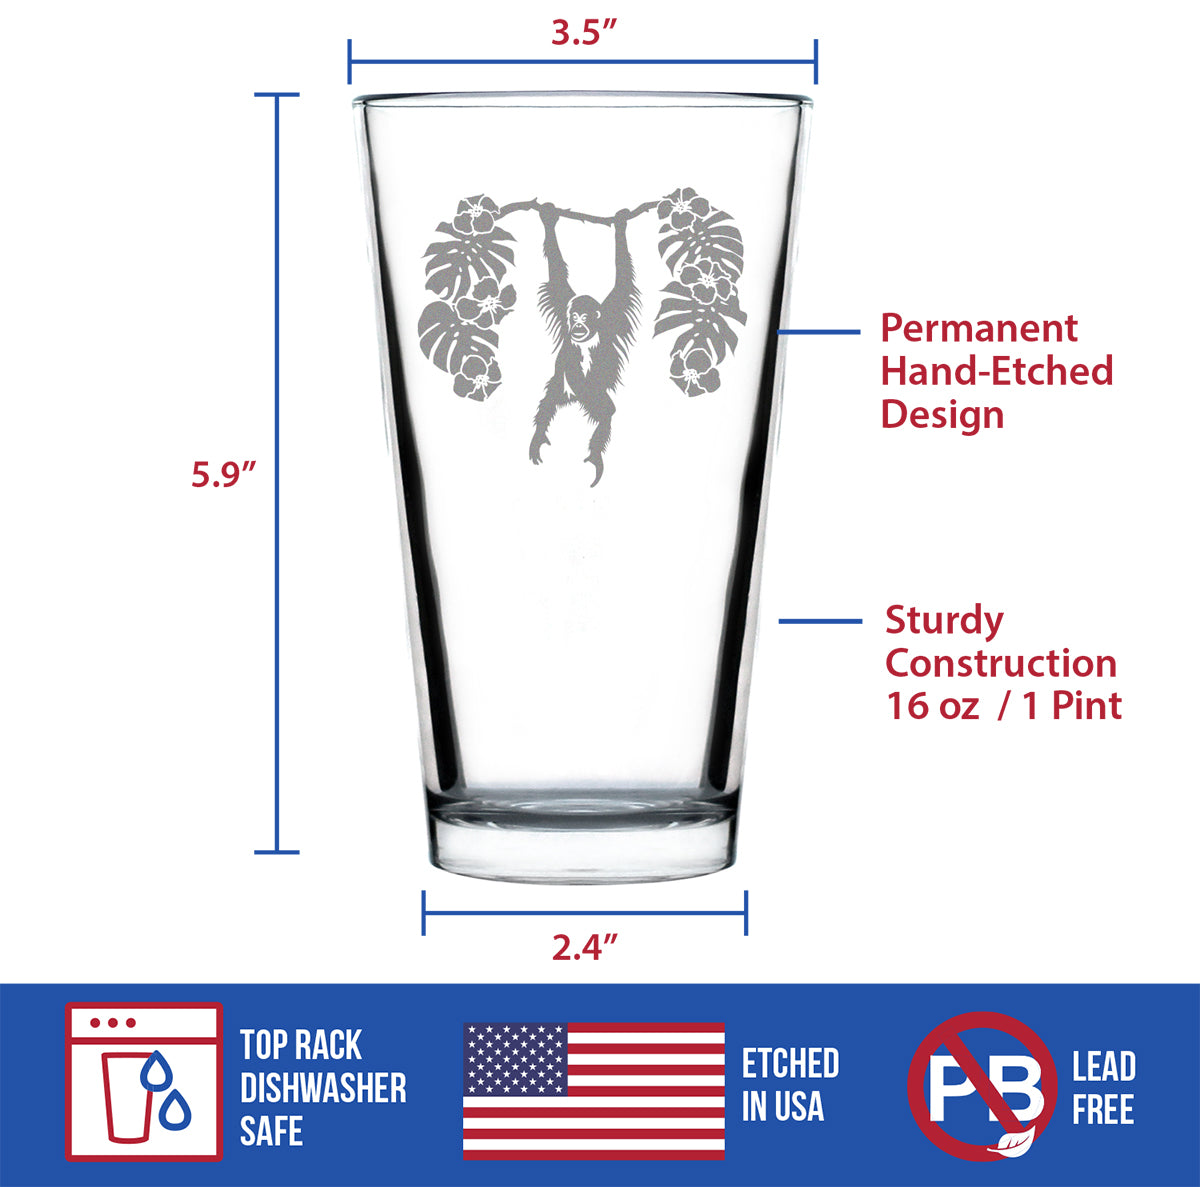 Orangutan Pint Glass for Beer - Fun Wild Animal Themed Decor and Gifts for Lovers of Apes and Monkeys - 16 Oz Glasses